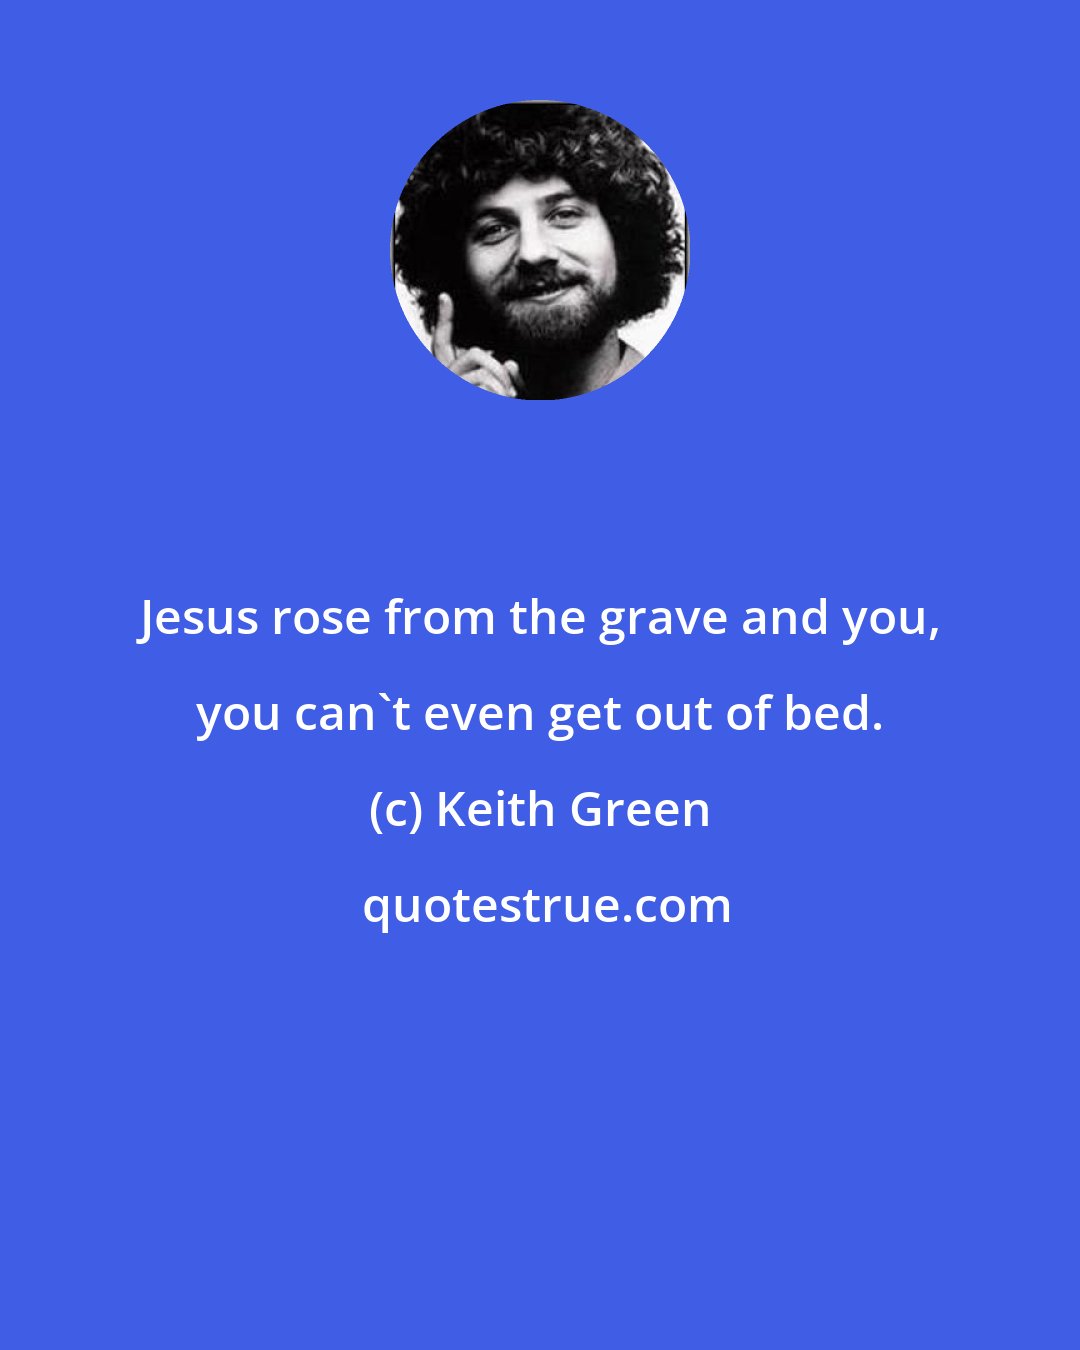 Keith Green: Jesus rose from the grave and you, you can't even get out of bed.